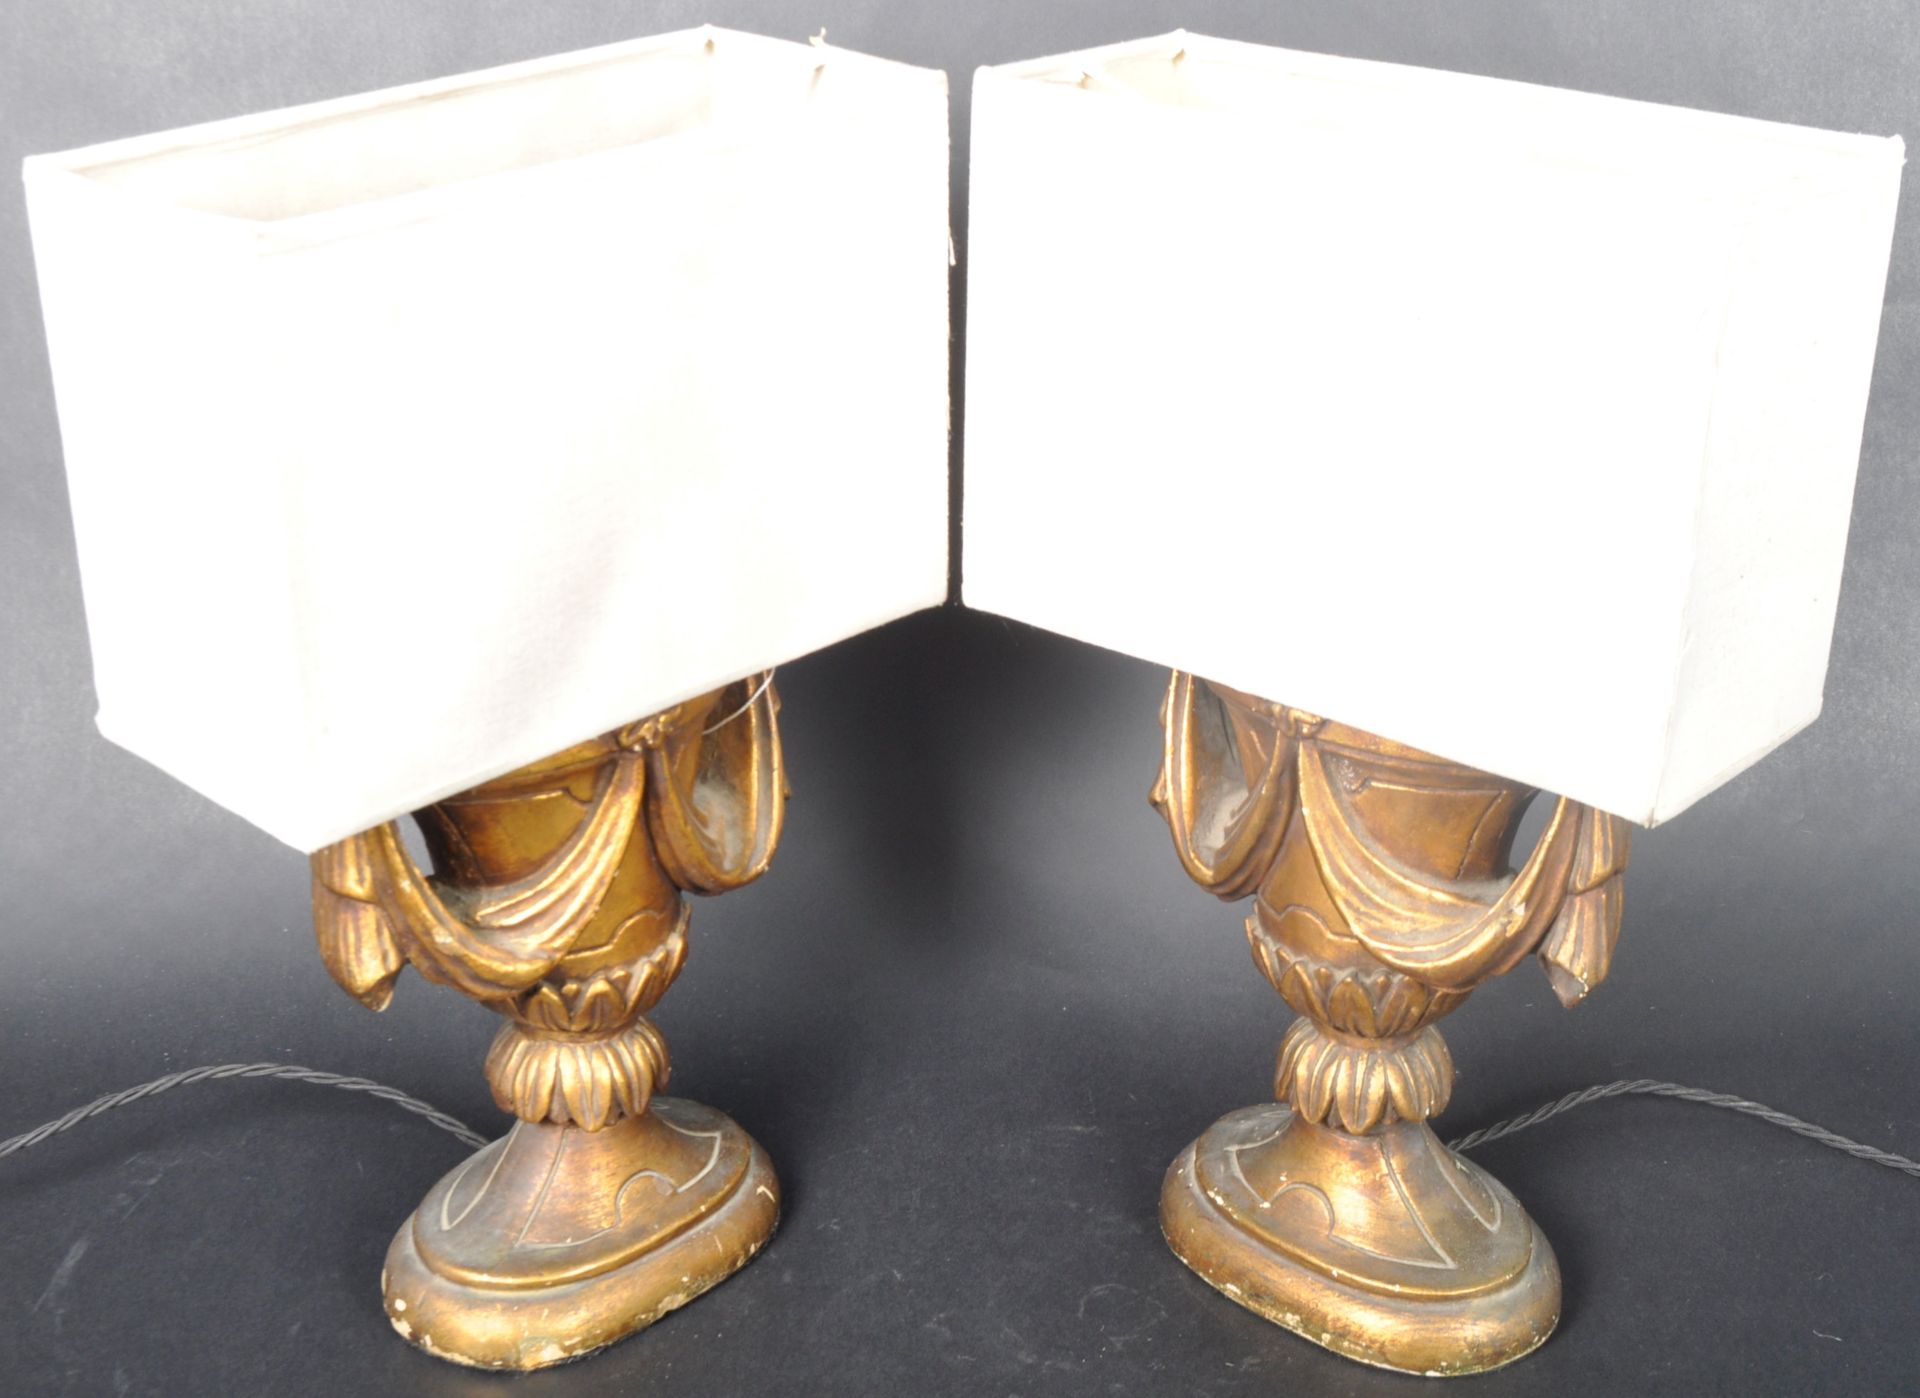 PAIR OF ART DECO GILT RESIN TABLE LAMP LIGHTS OF URN FORM - Image 2 of 9